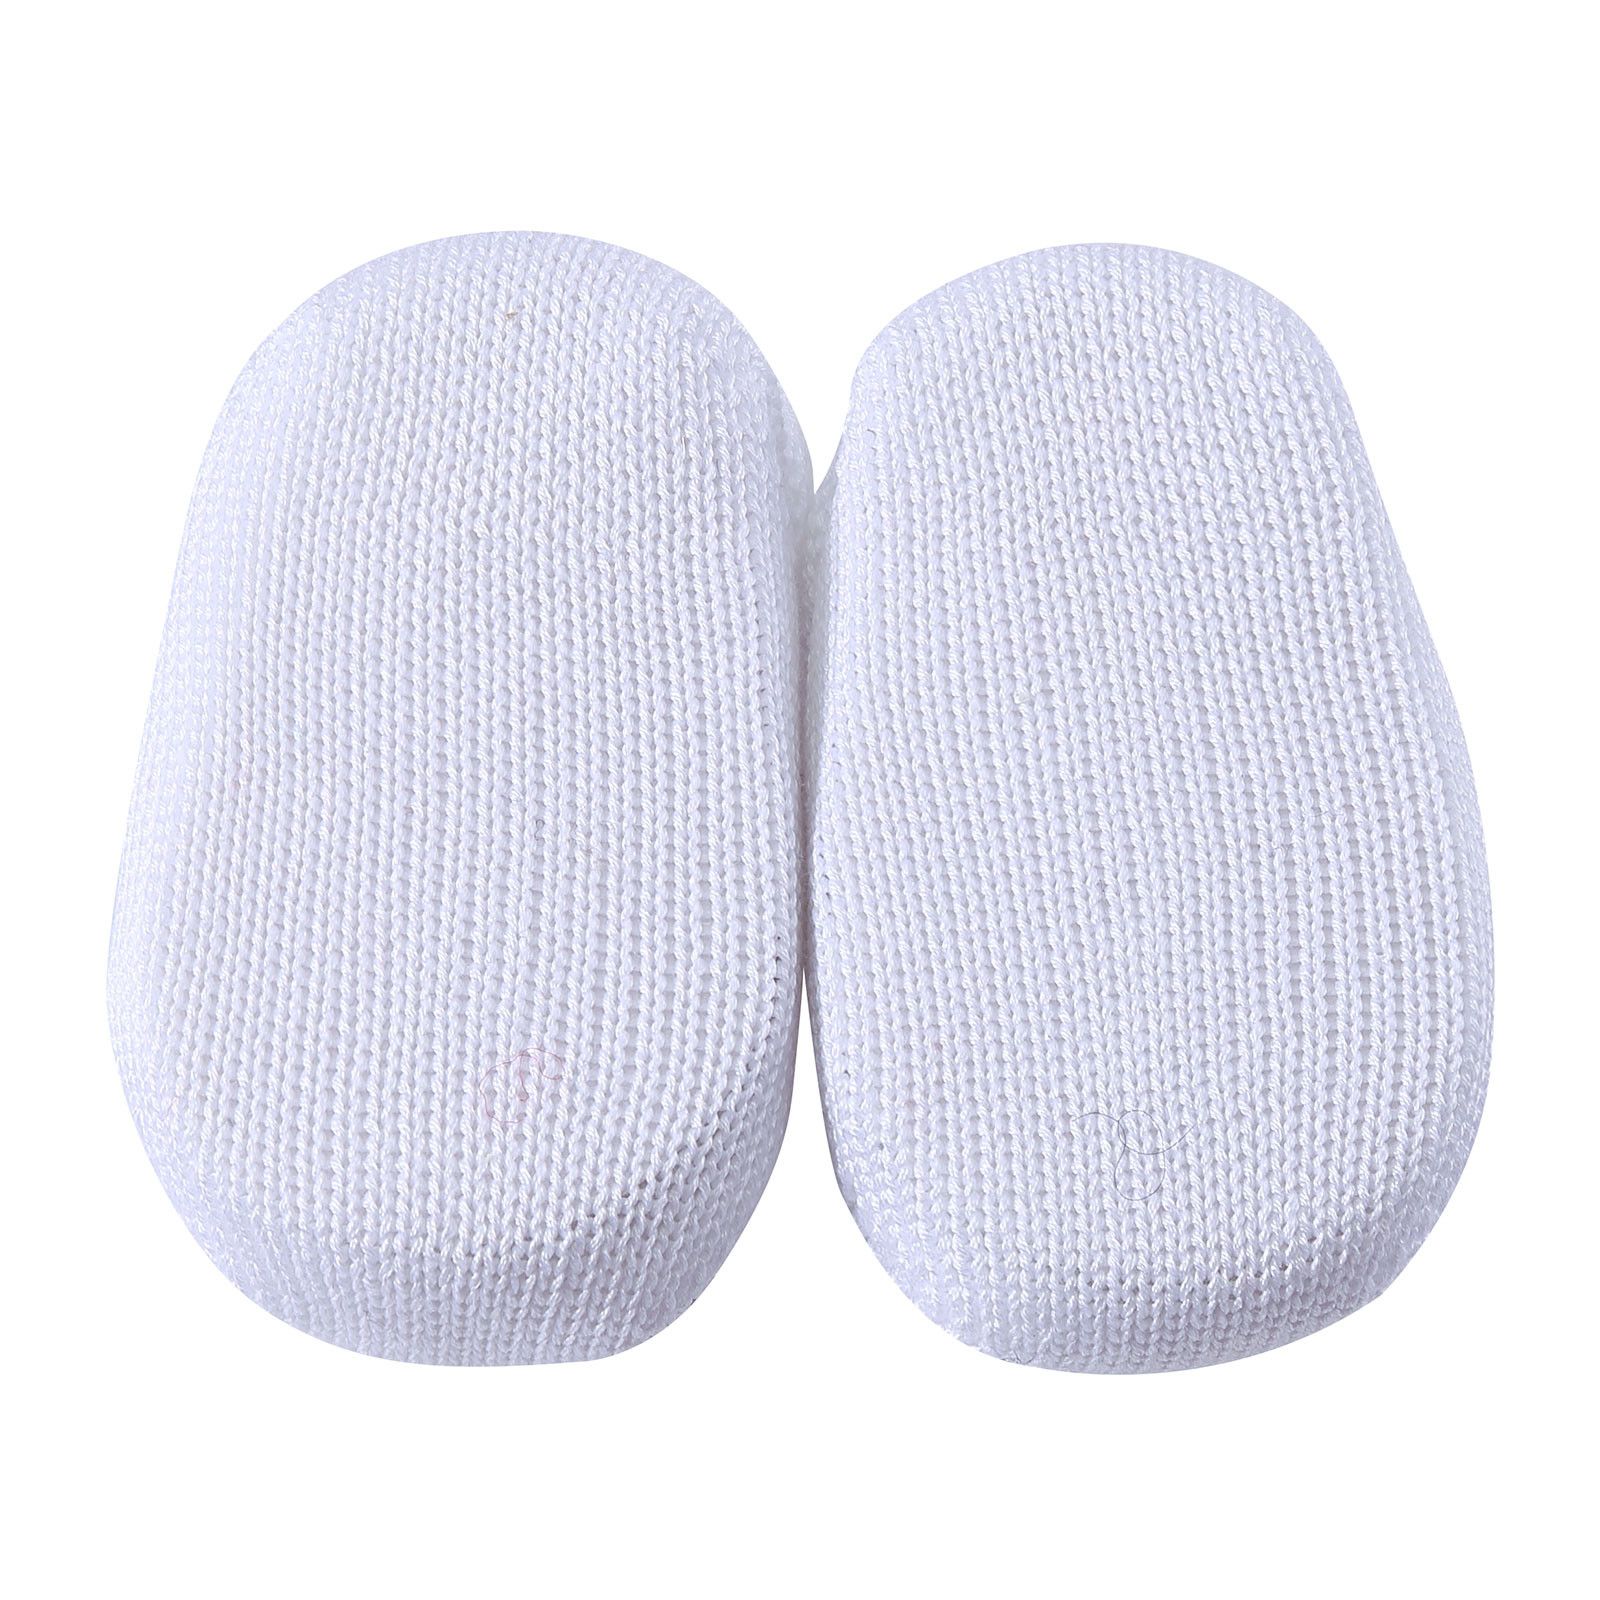 Baby White Knitted Cotton Shoes With Blue Tie Trims - CÉMAROSE | Children's Fashion Store - 4